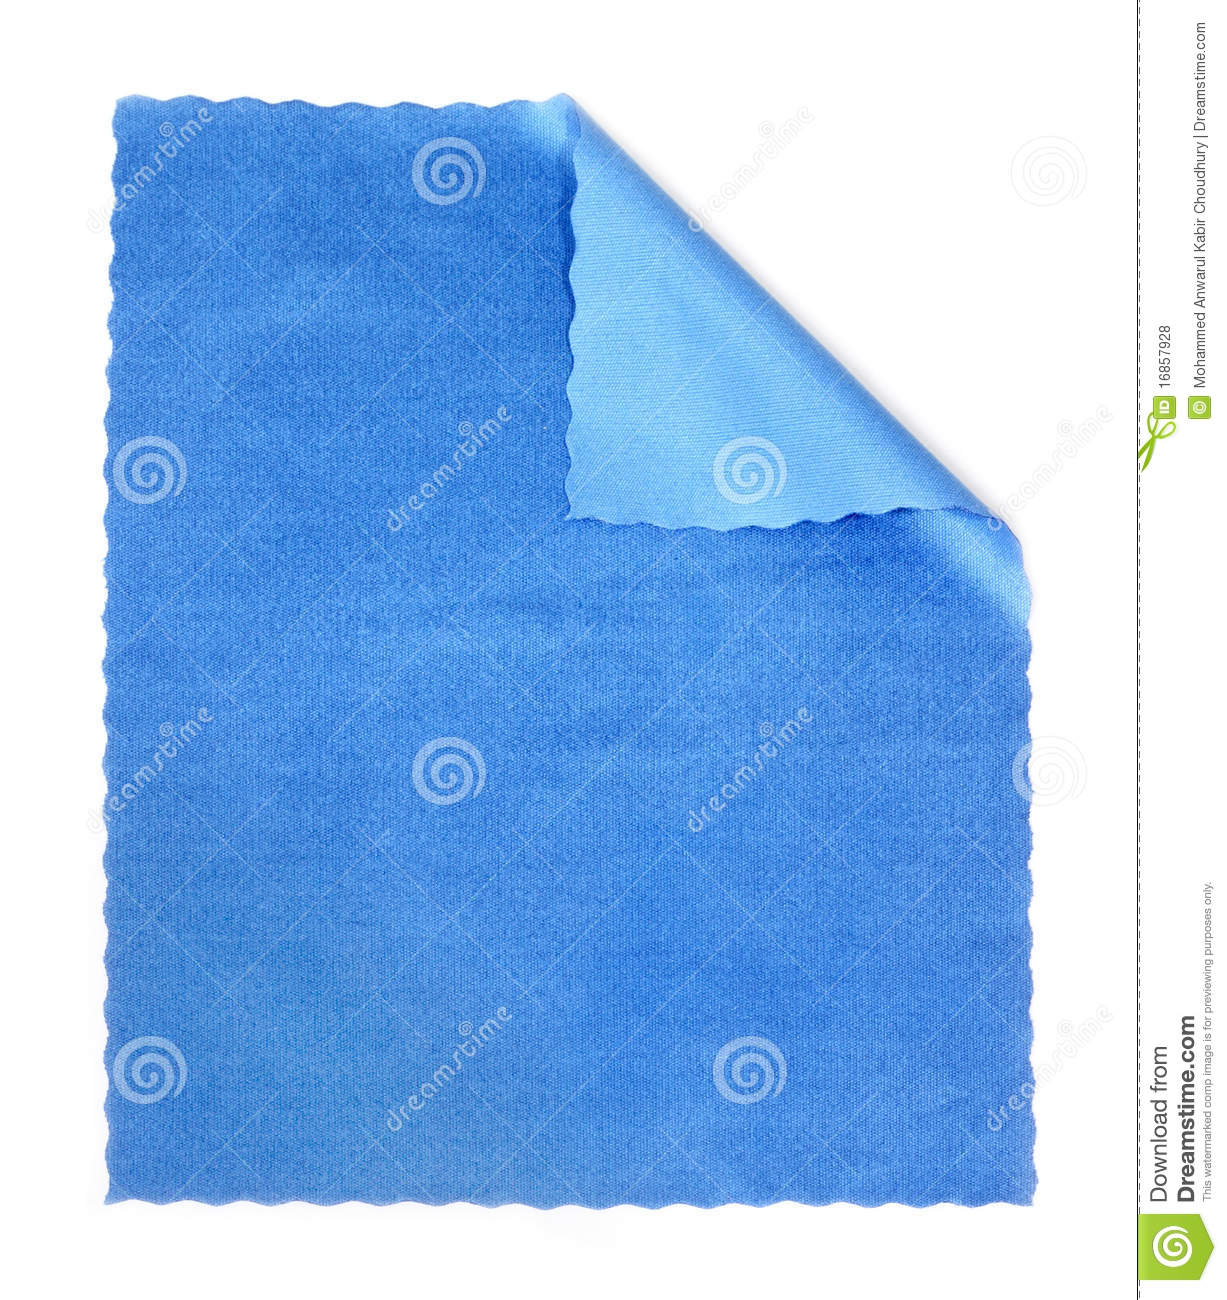 Dust Wiping Cloth Royalty Free Stock Photos   Image  16857928